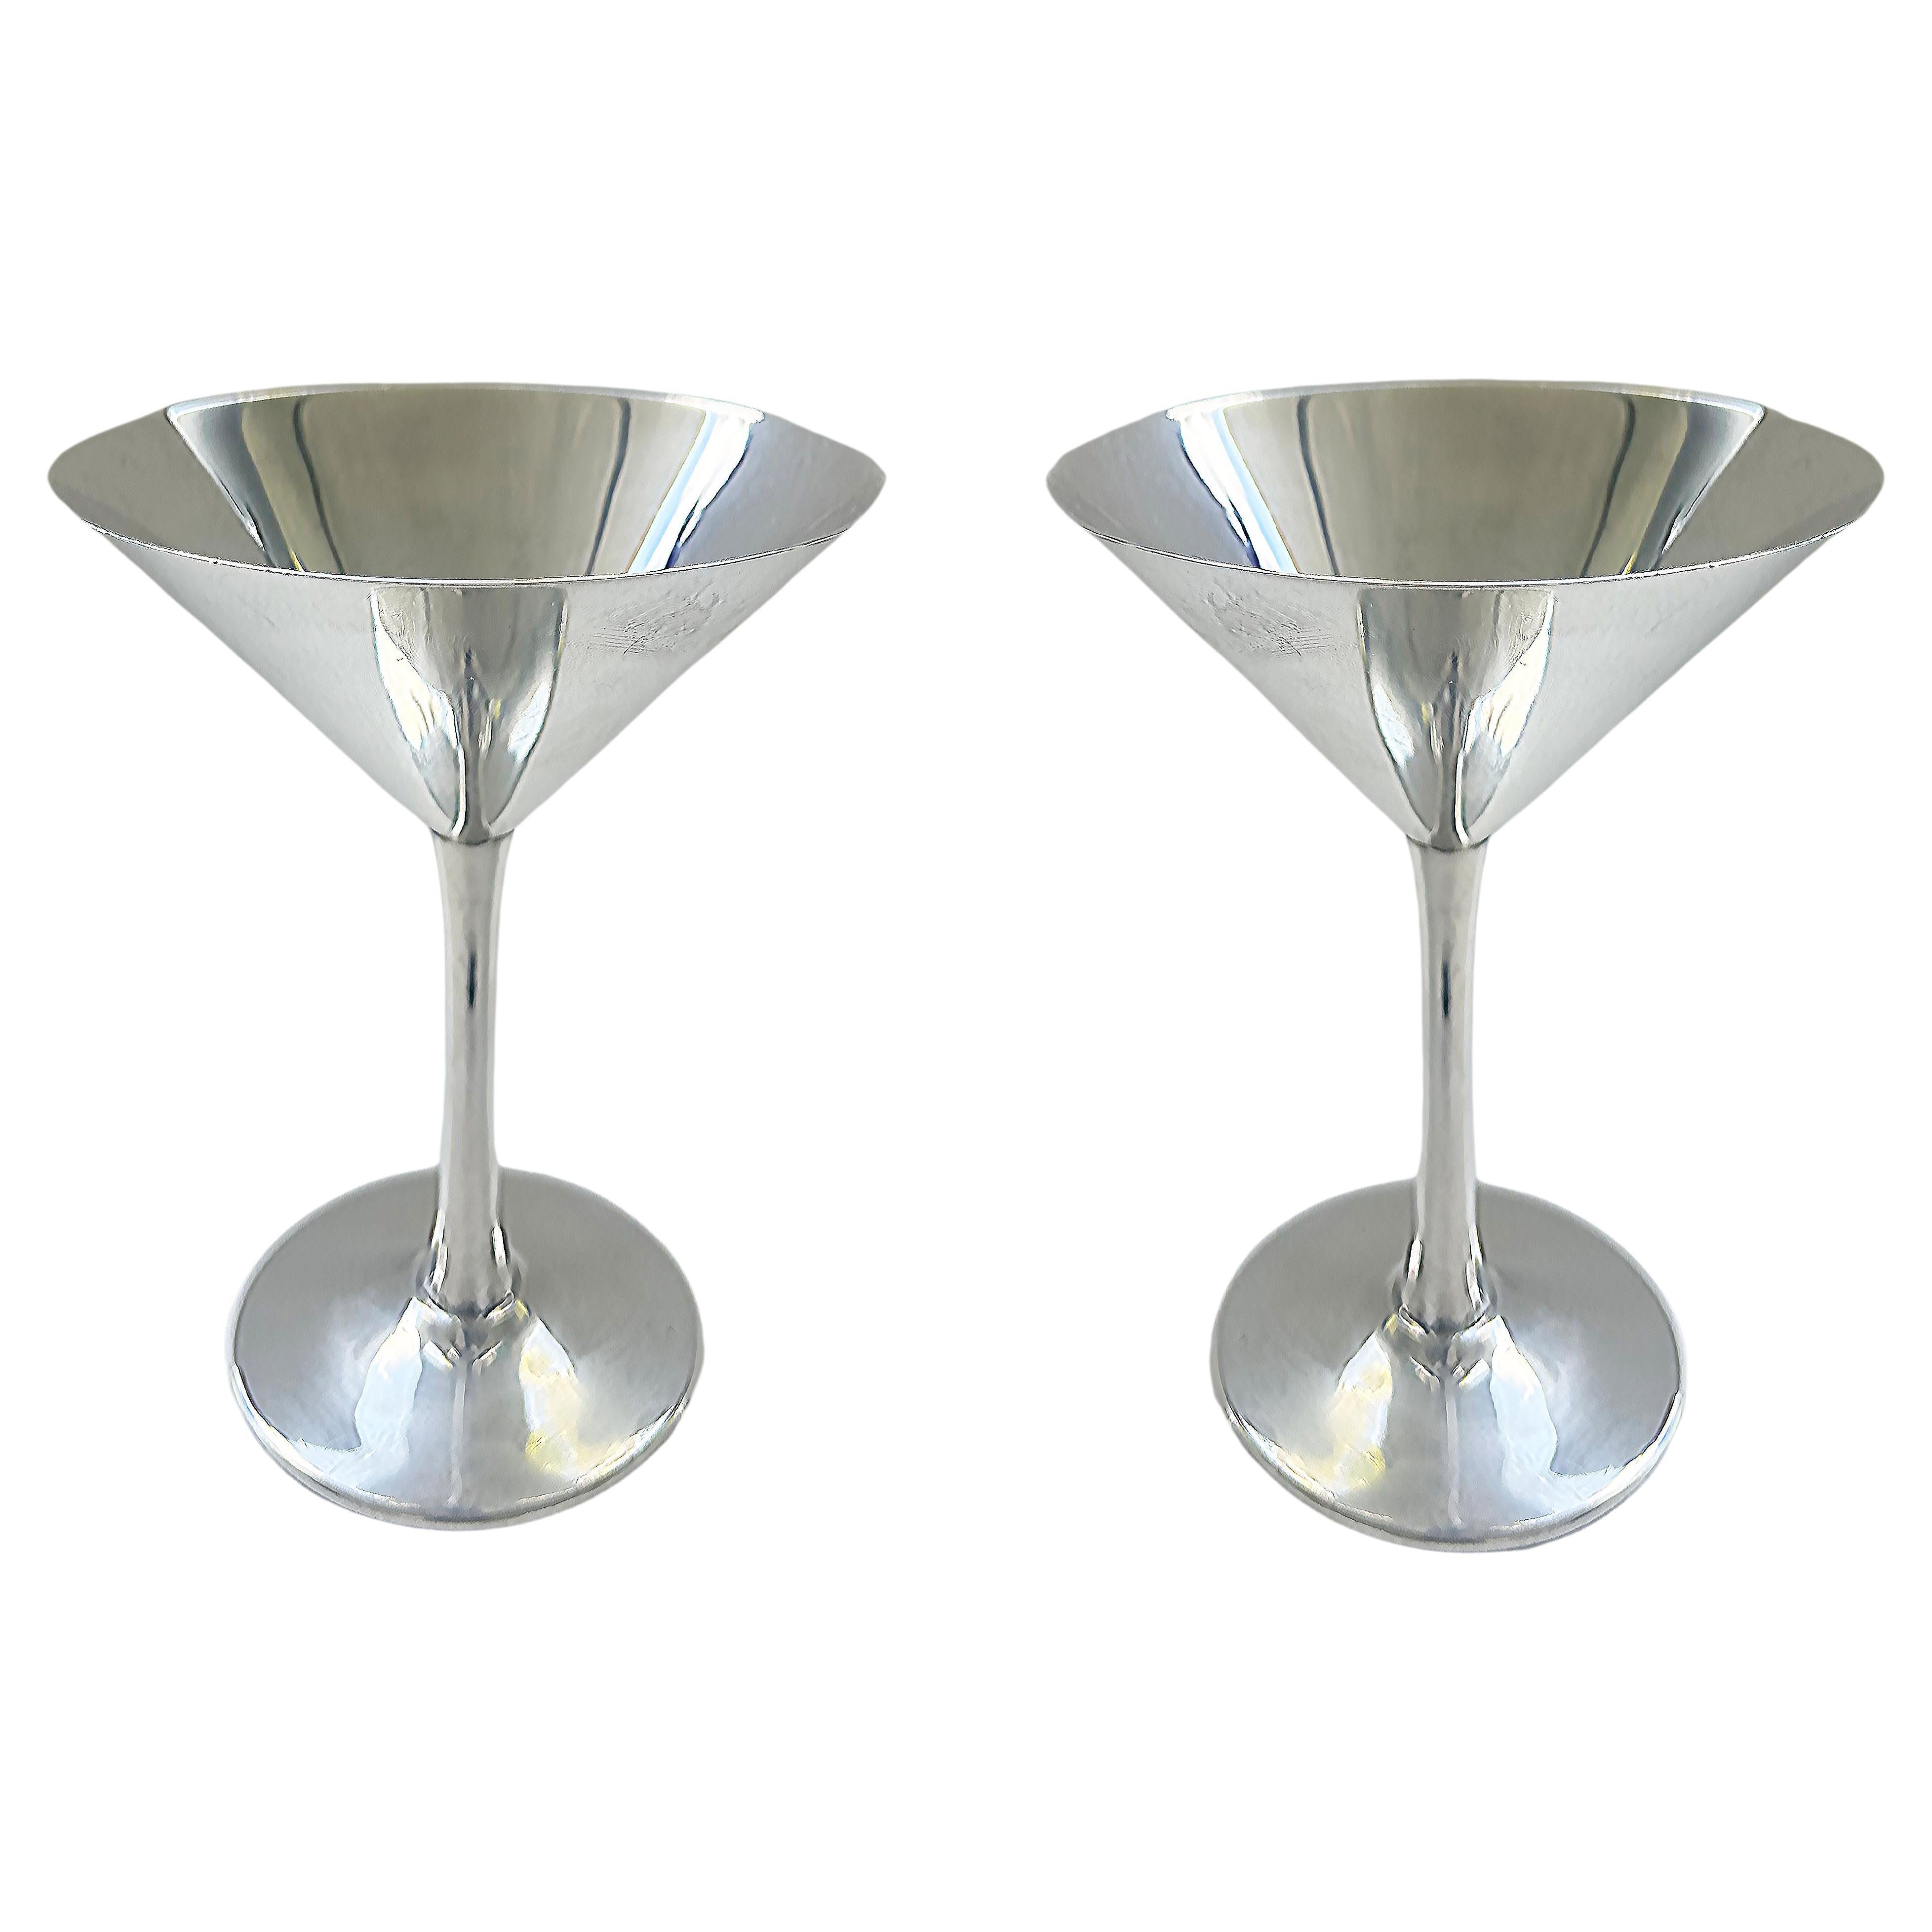 Cartier France Stamped 925 Sterling Silver Martini Goblets,  A Pair For Sale